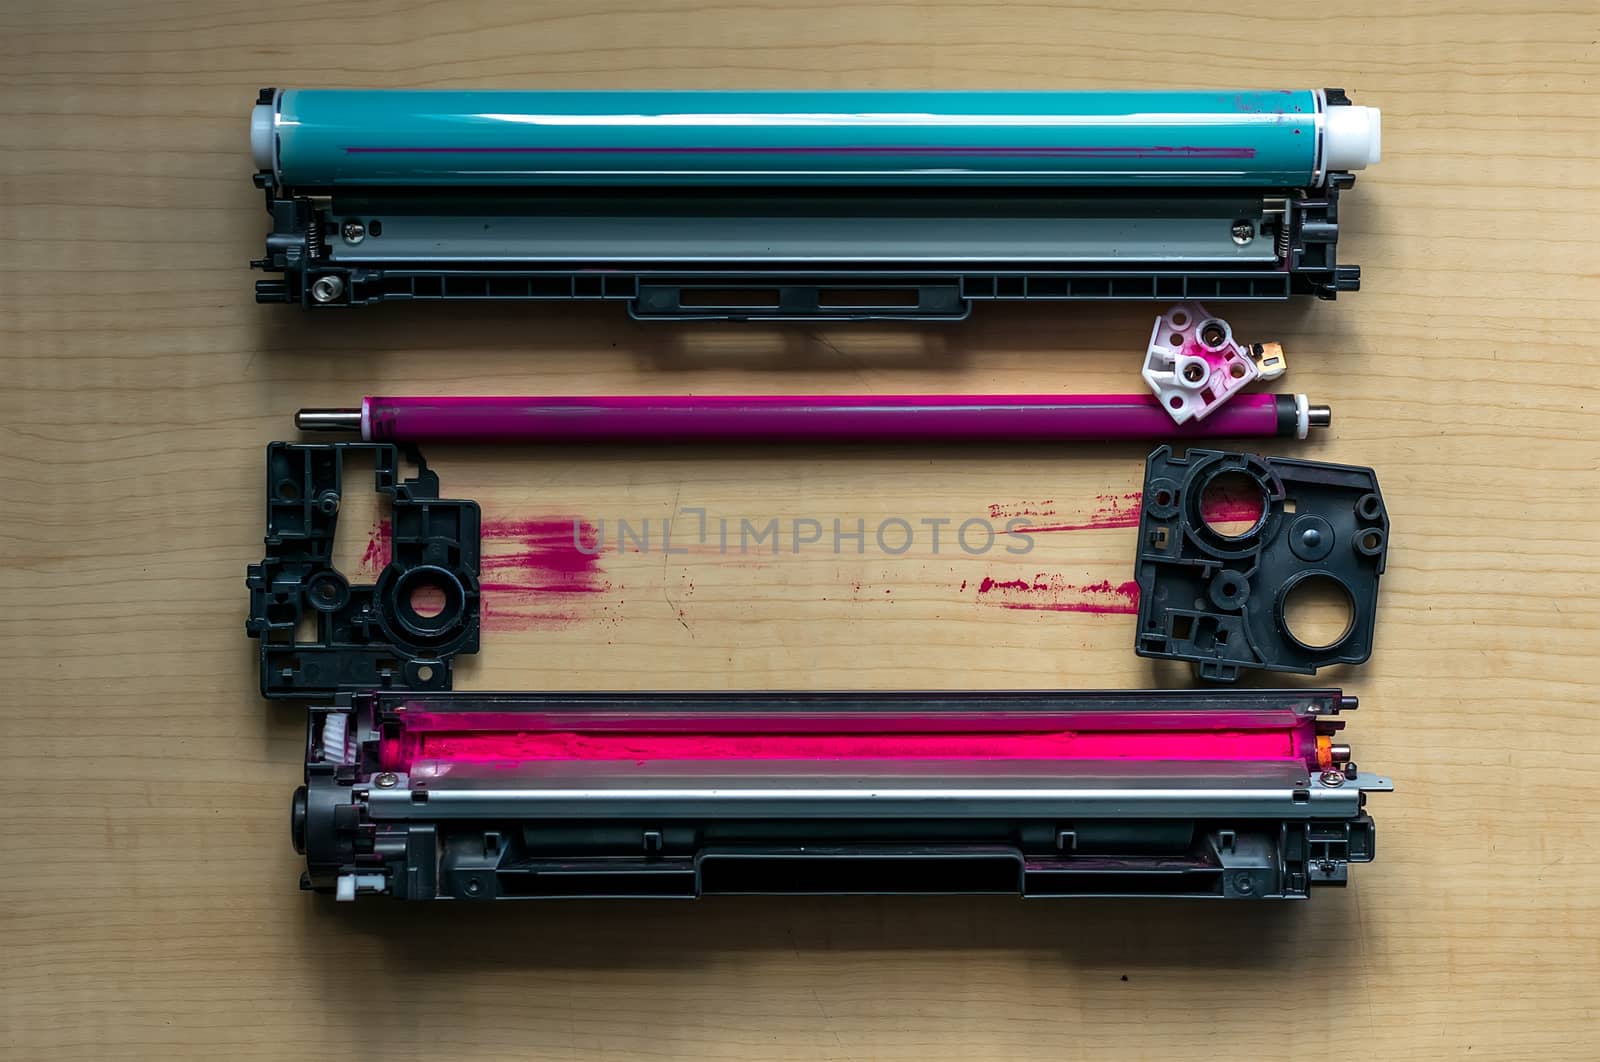 Disassembled into parts of the color cartridge from the laser printer is on a wooden table